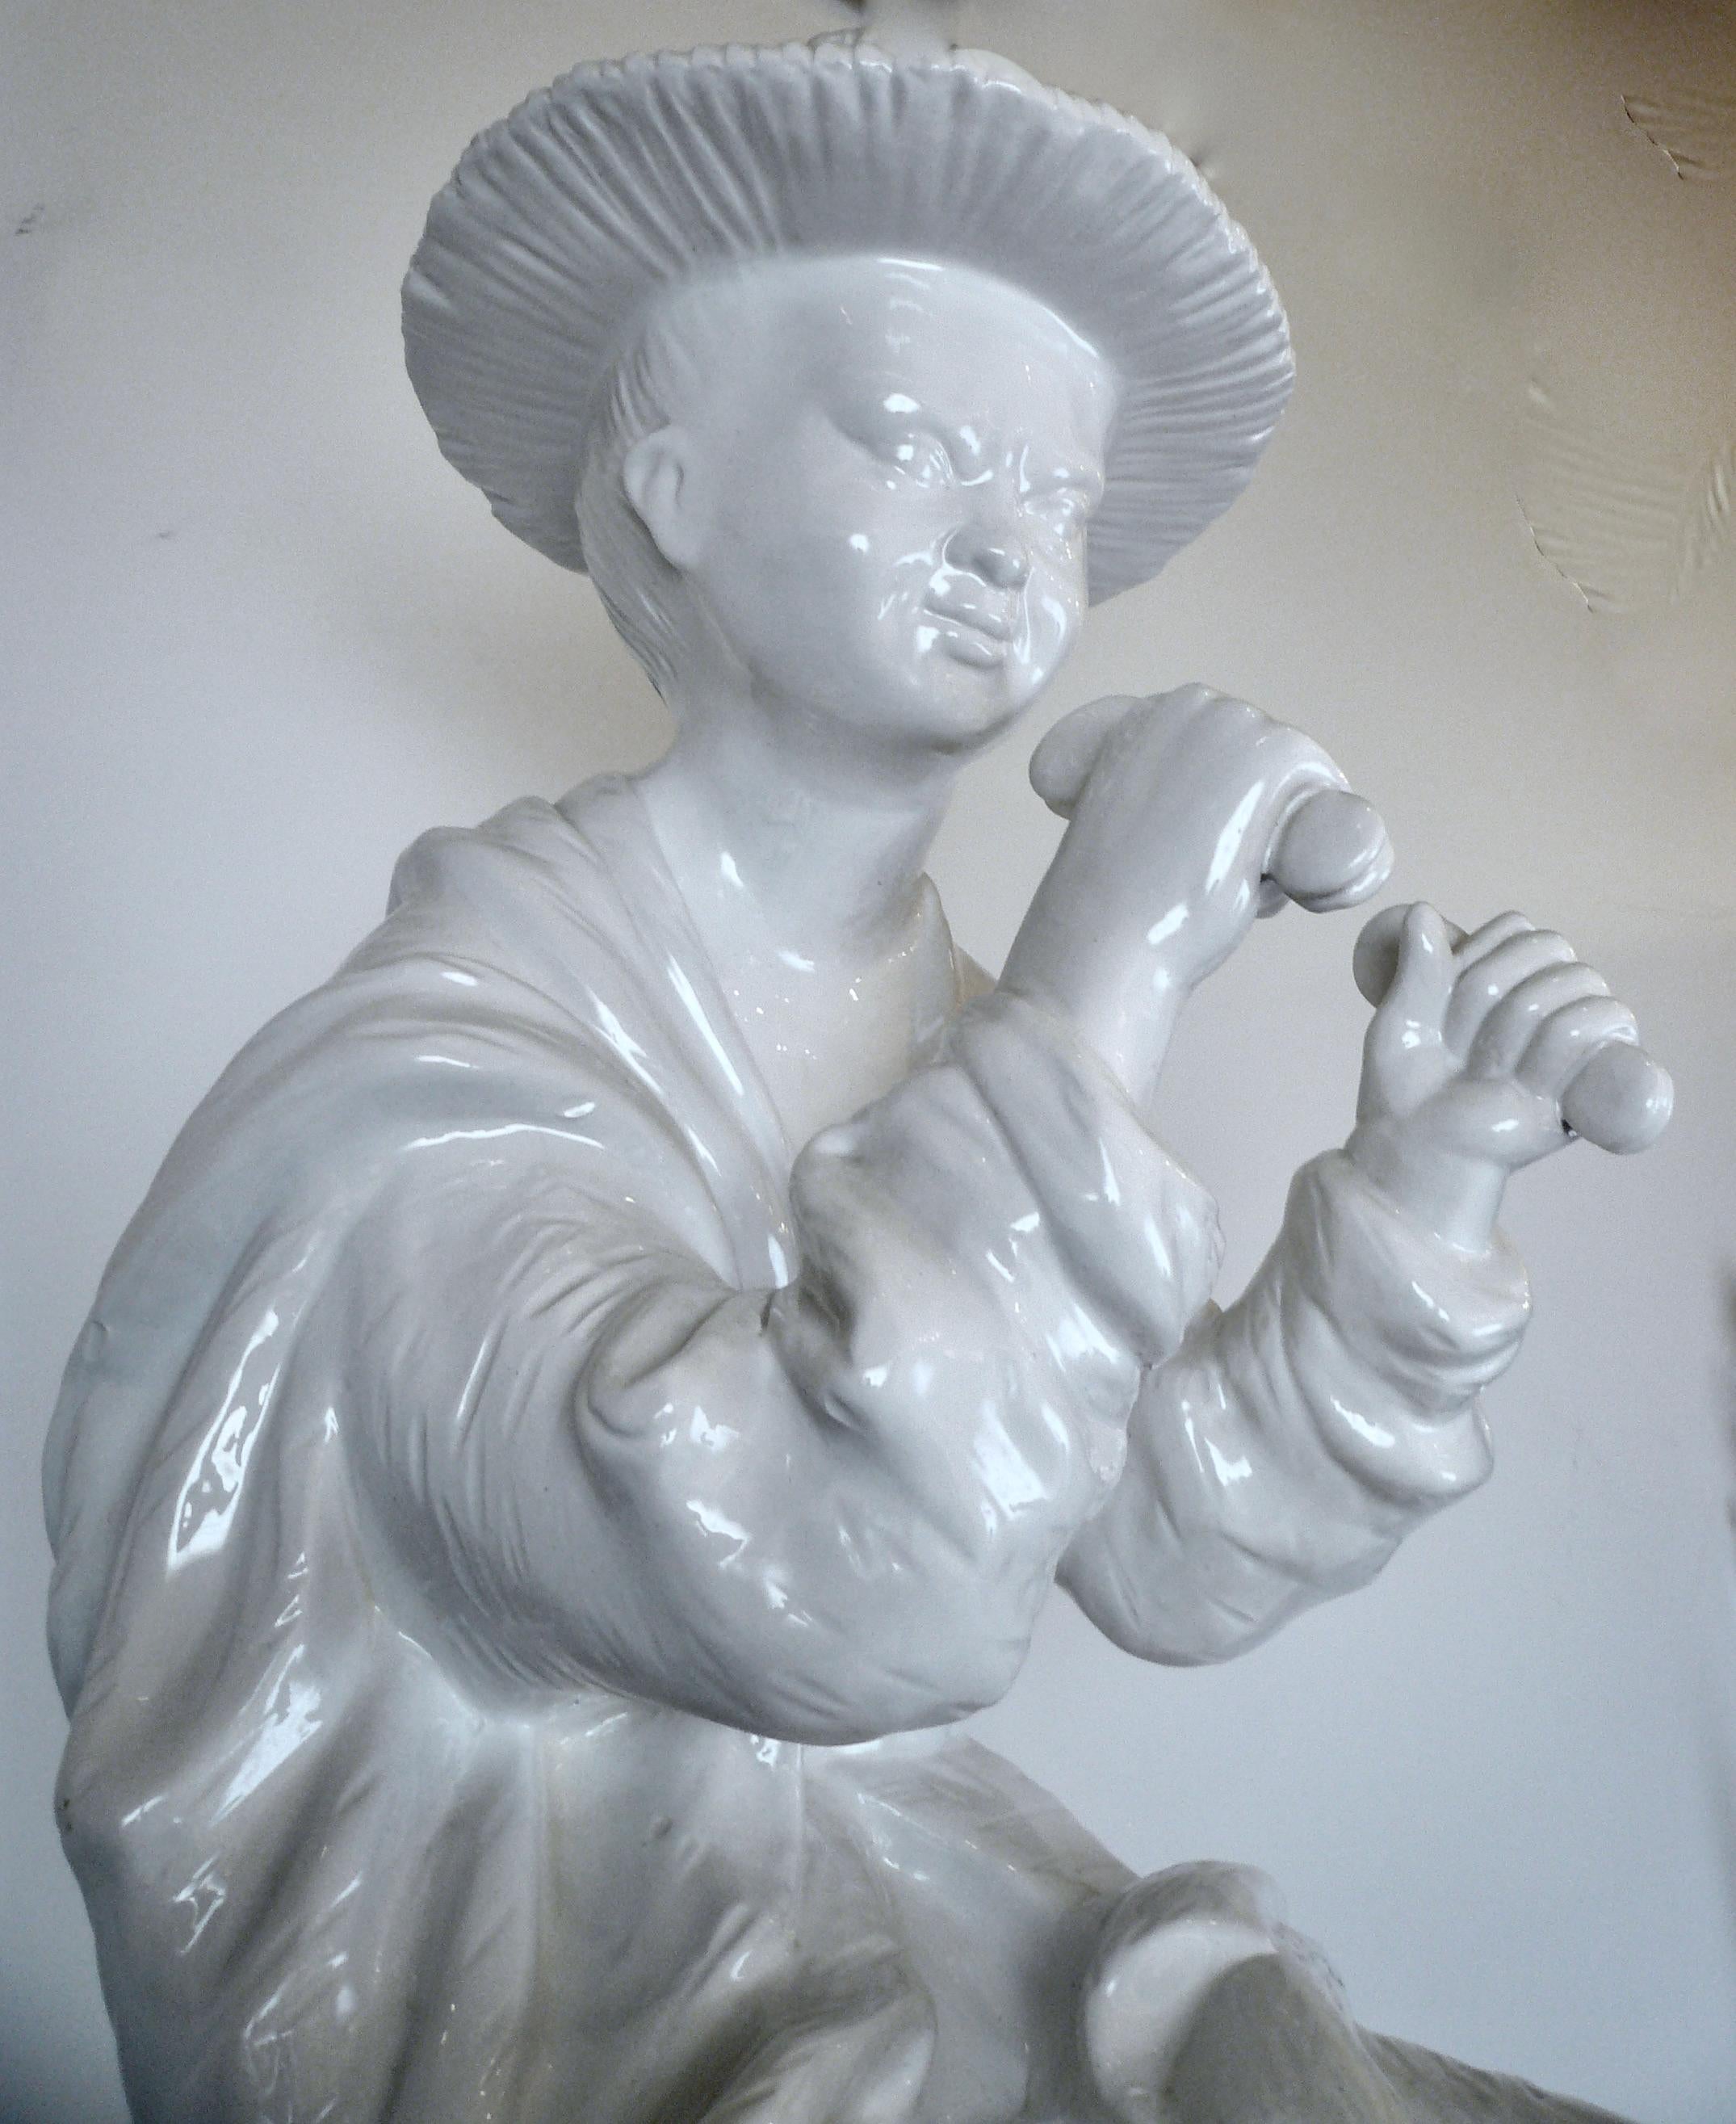 Glazed Large Ceramic Blanc de Chine Figure of a Chinese Musician on Pedestal